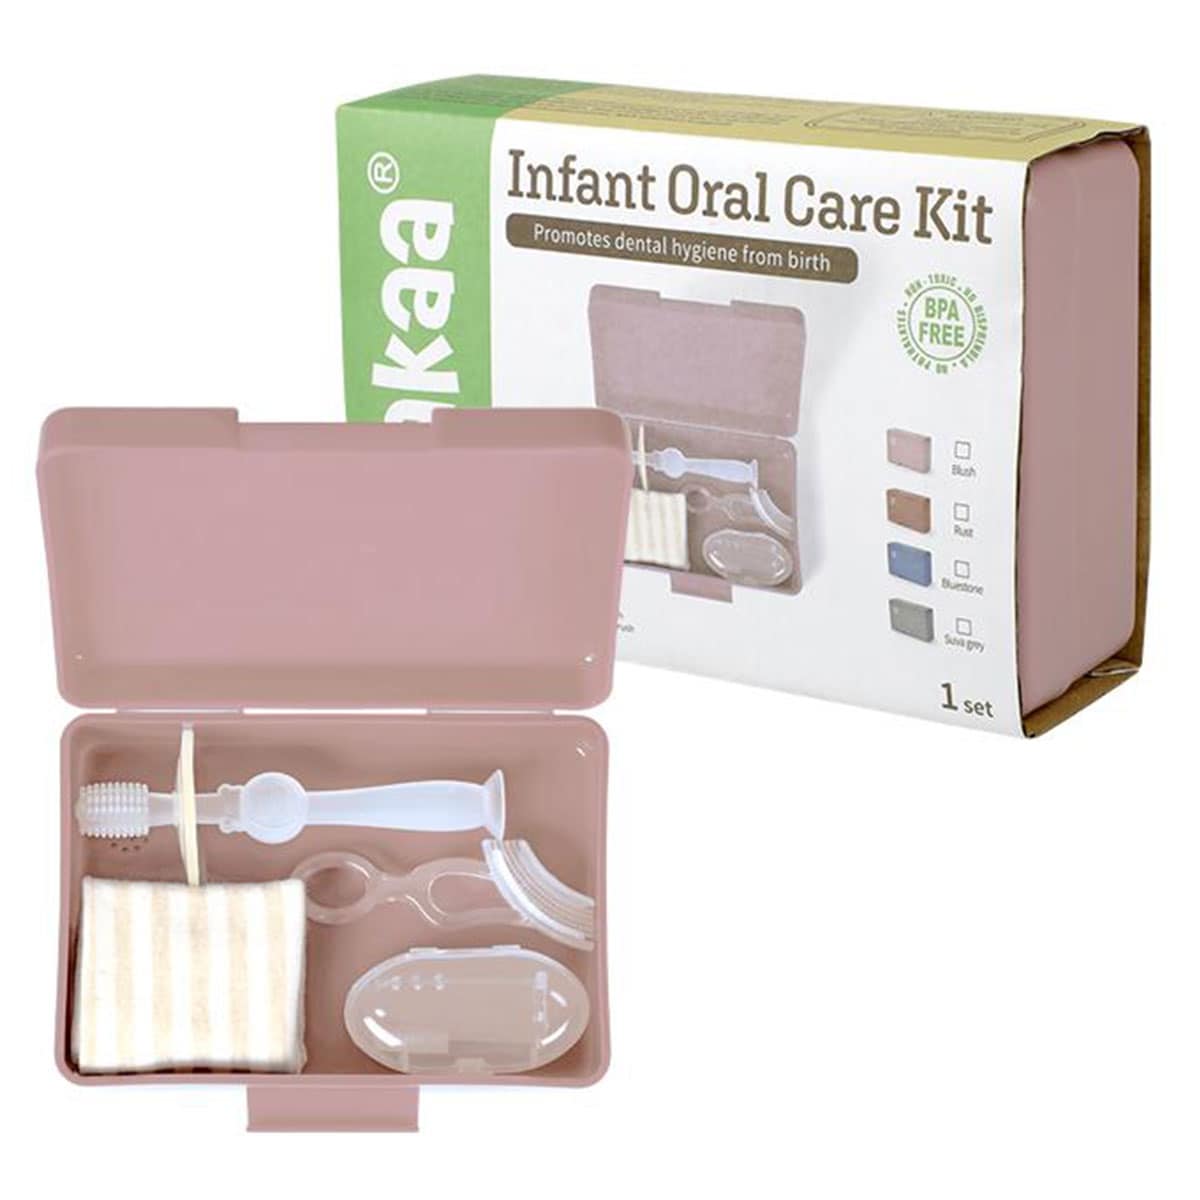 Haakaa Infant Oral Care Set Blush